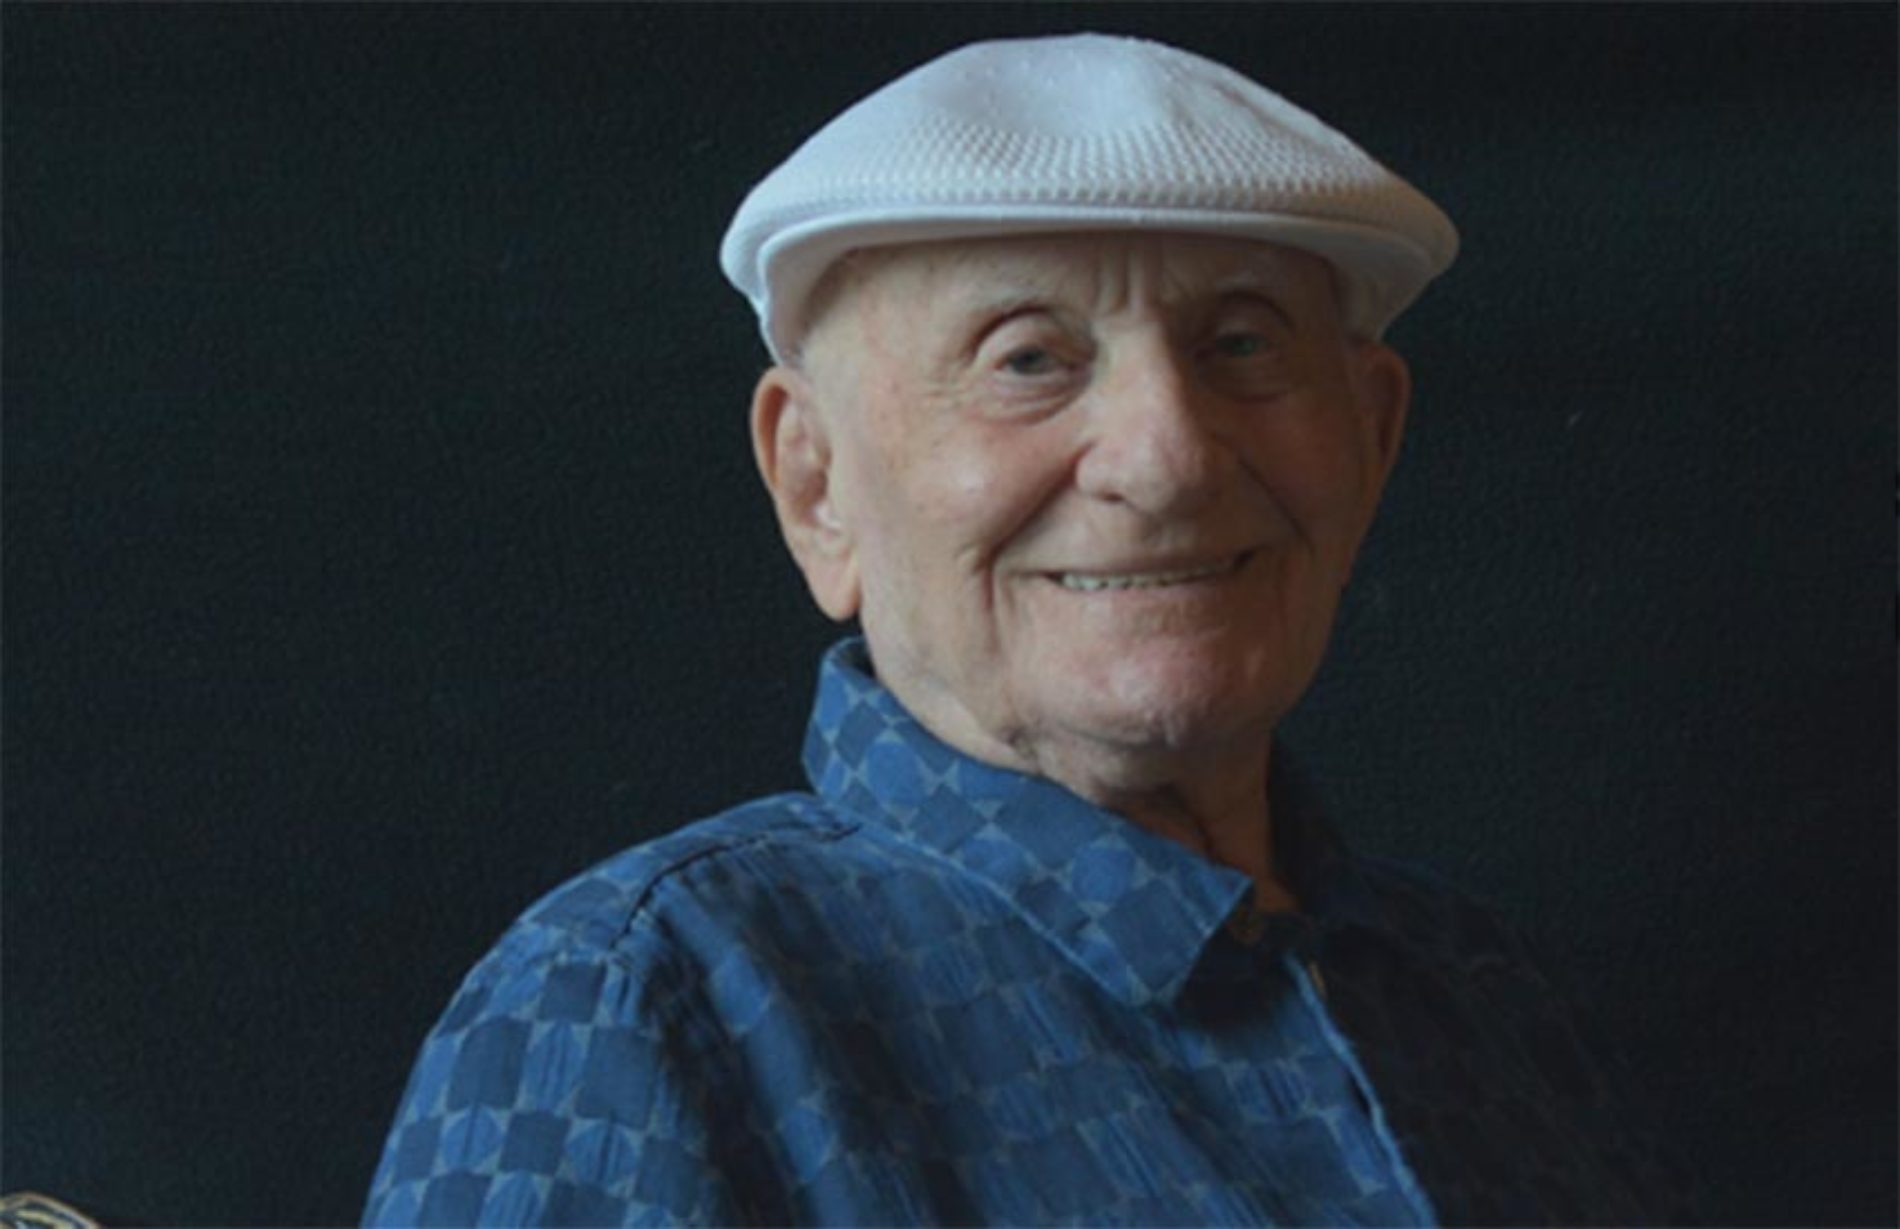 Meet the grandfather who came out at 95 years old